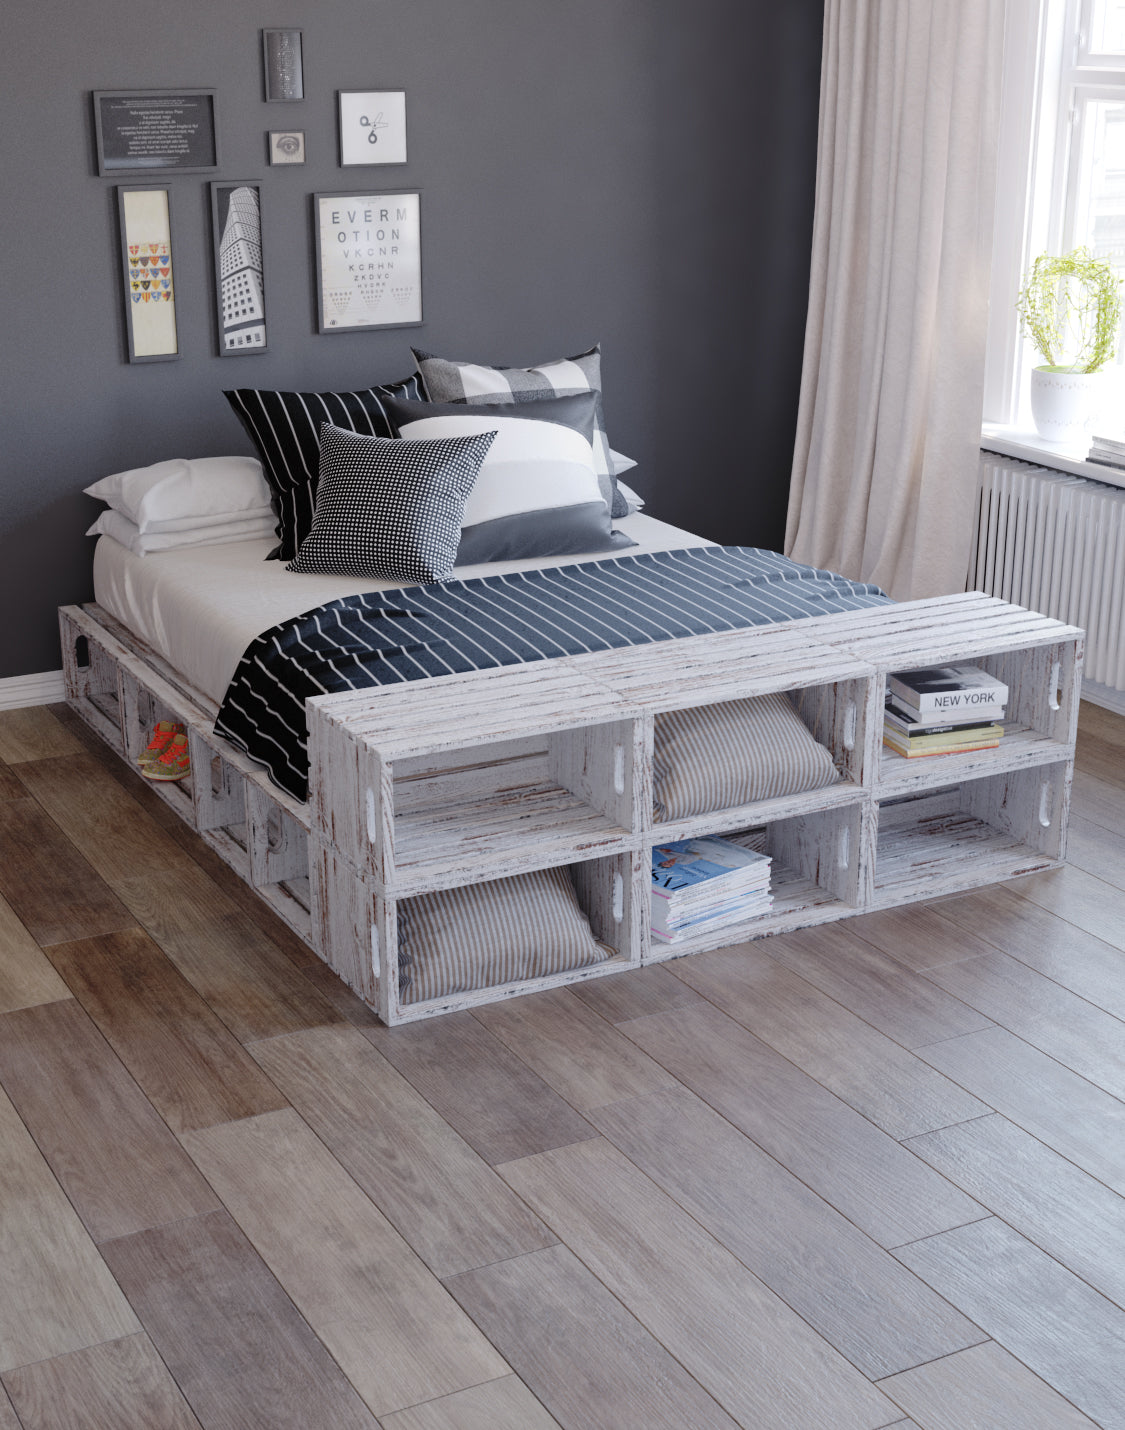 GERARD Multi-Storage Bed Modular And real wood furniture product